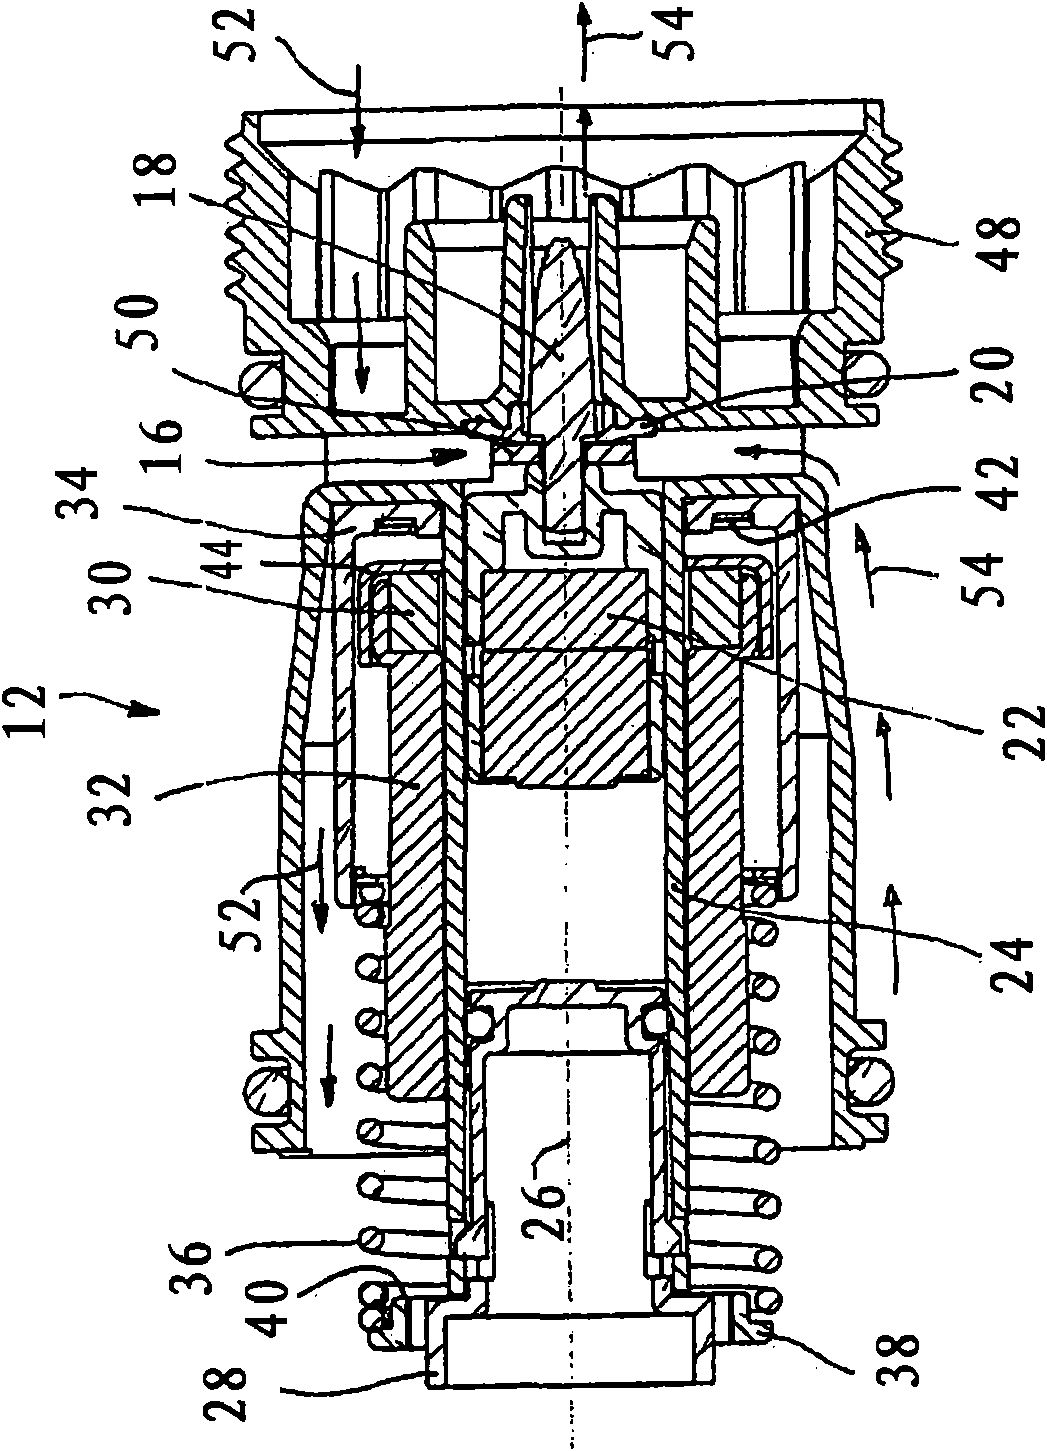 Fuel nozzle with device for extracting fuel steams